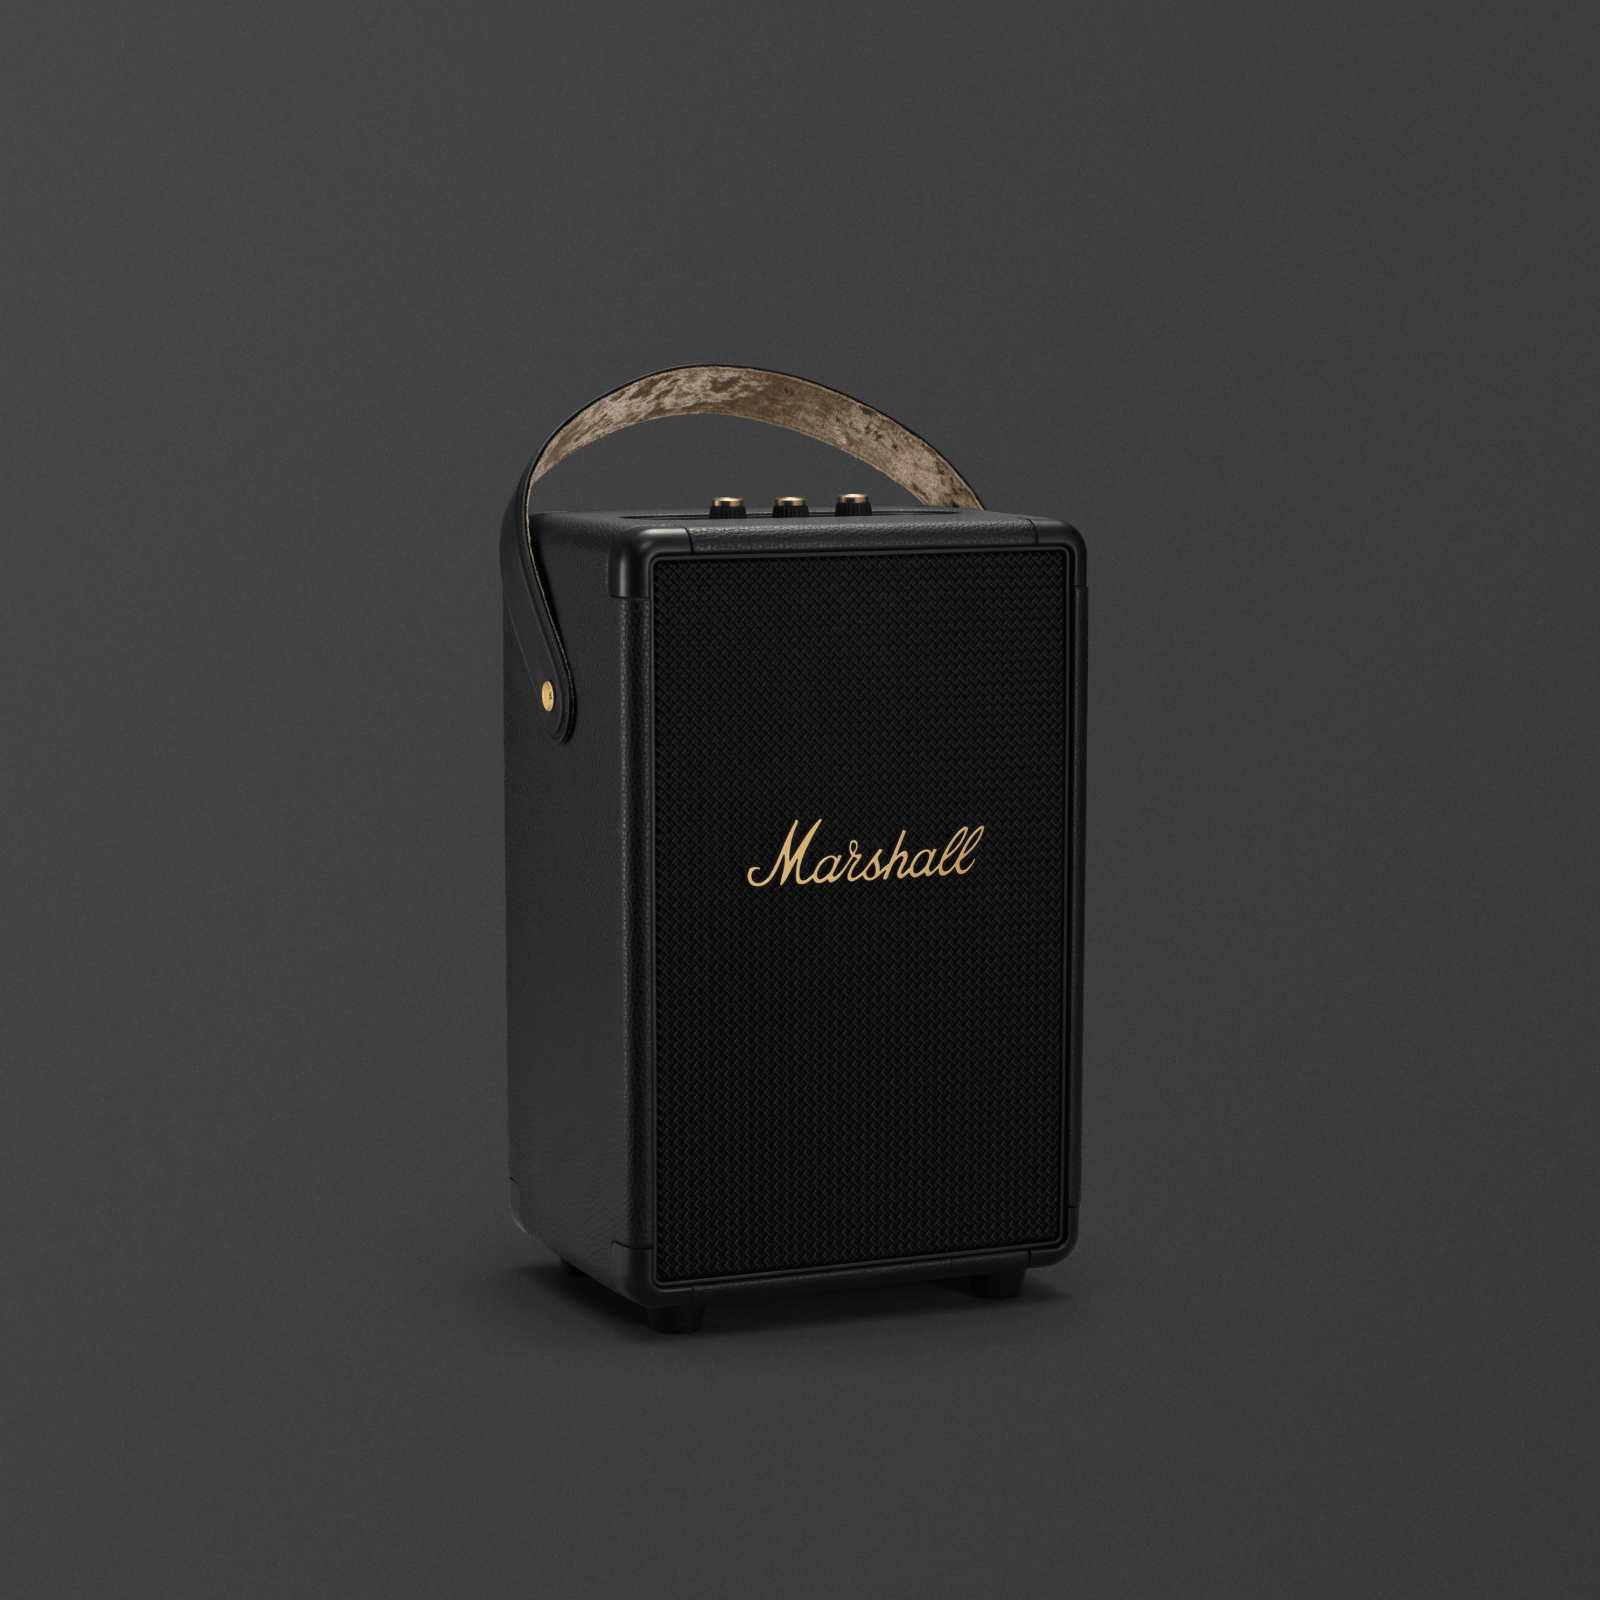 The Marshall Tufton Black and Brass portable Bluetooth speaker is a sleek and stylish black speaker that delivers powerful audio.